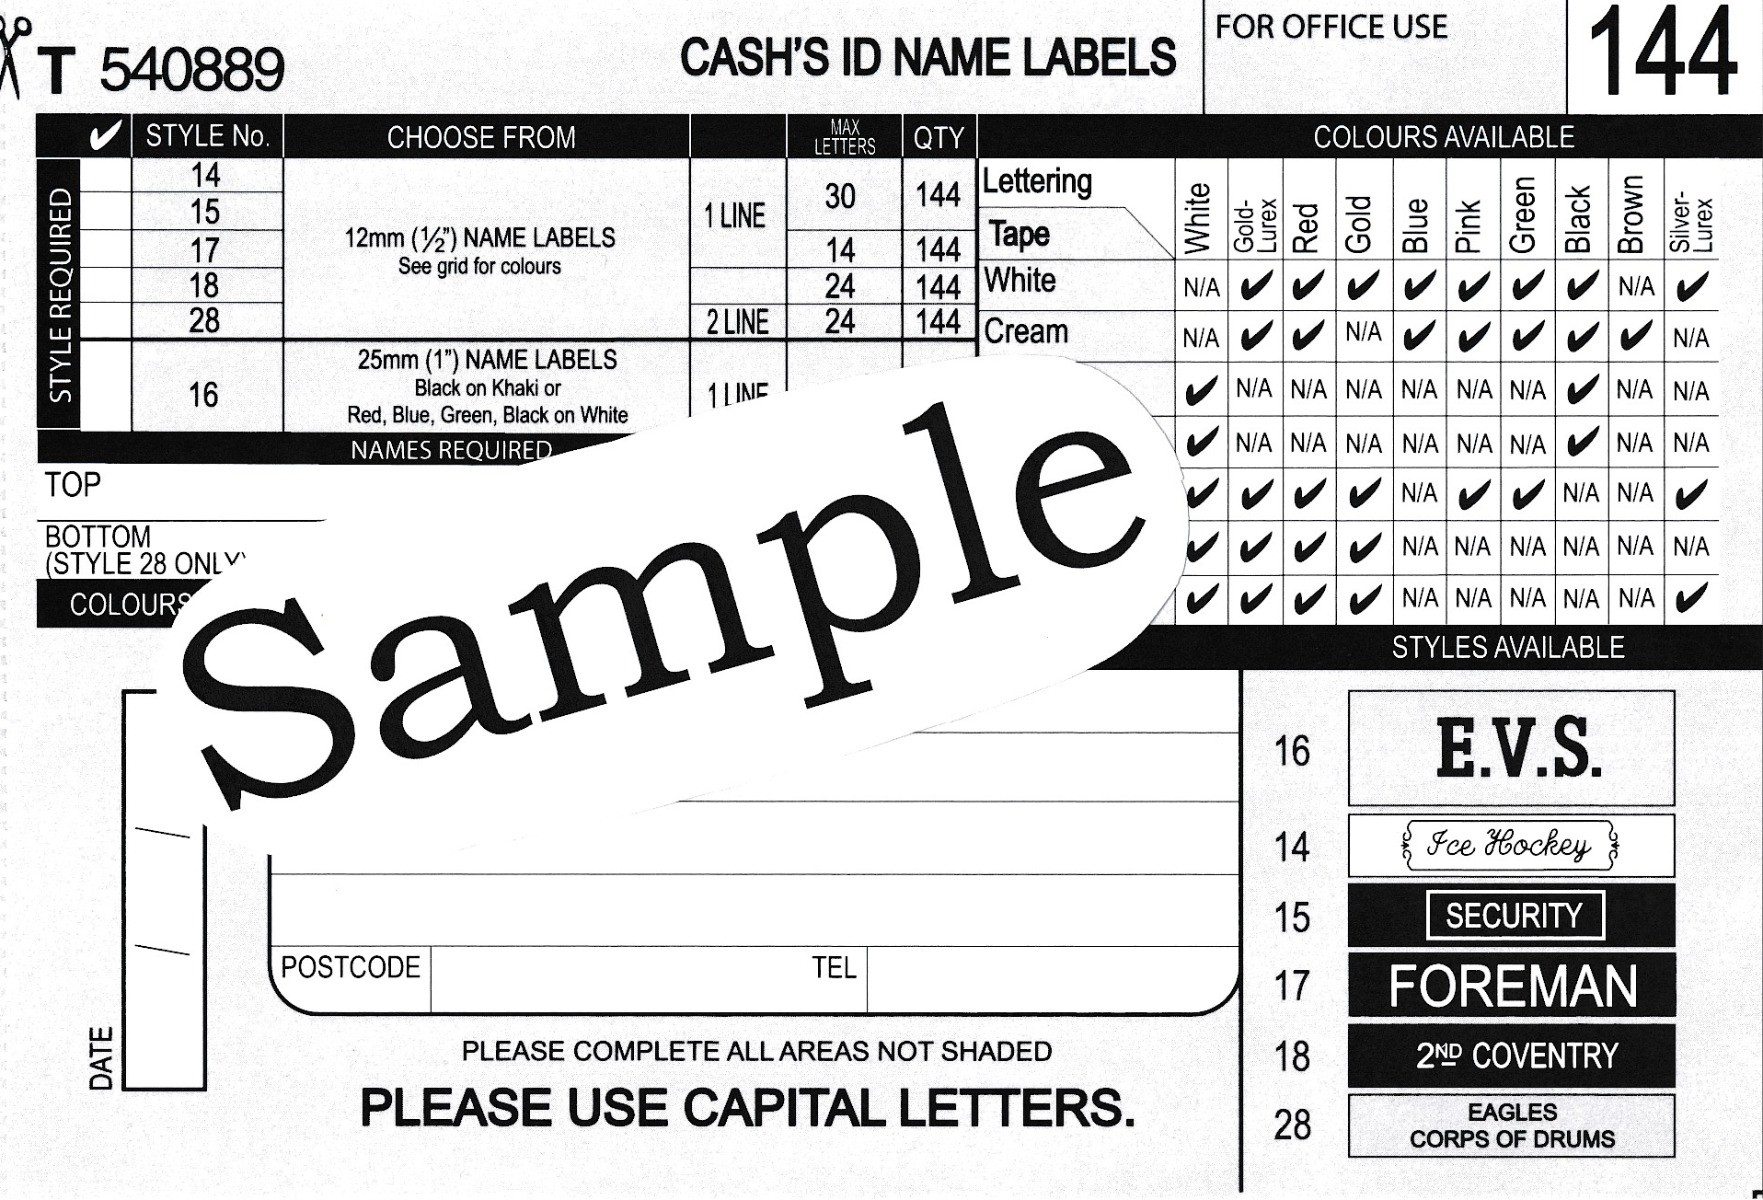 Cash's Name Tapes Order Cards 144 -